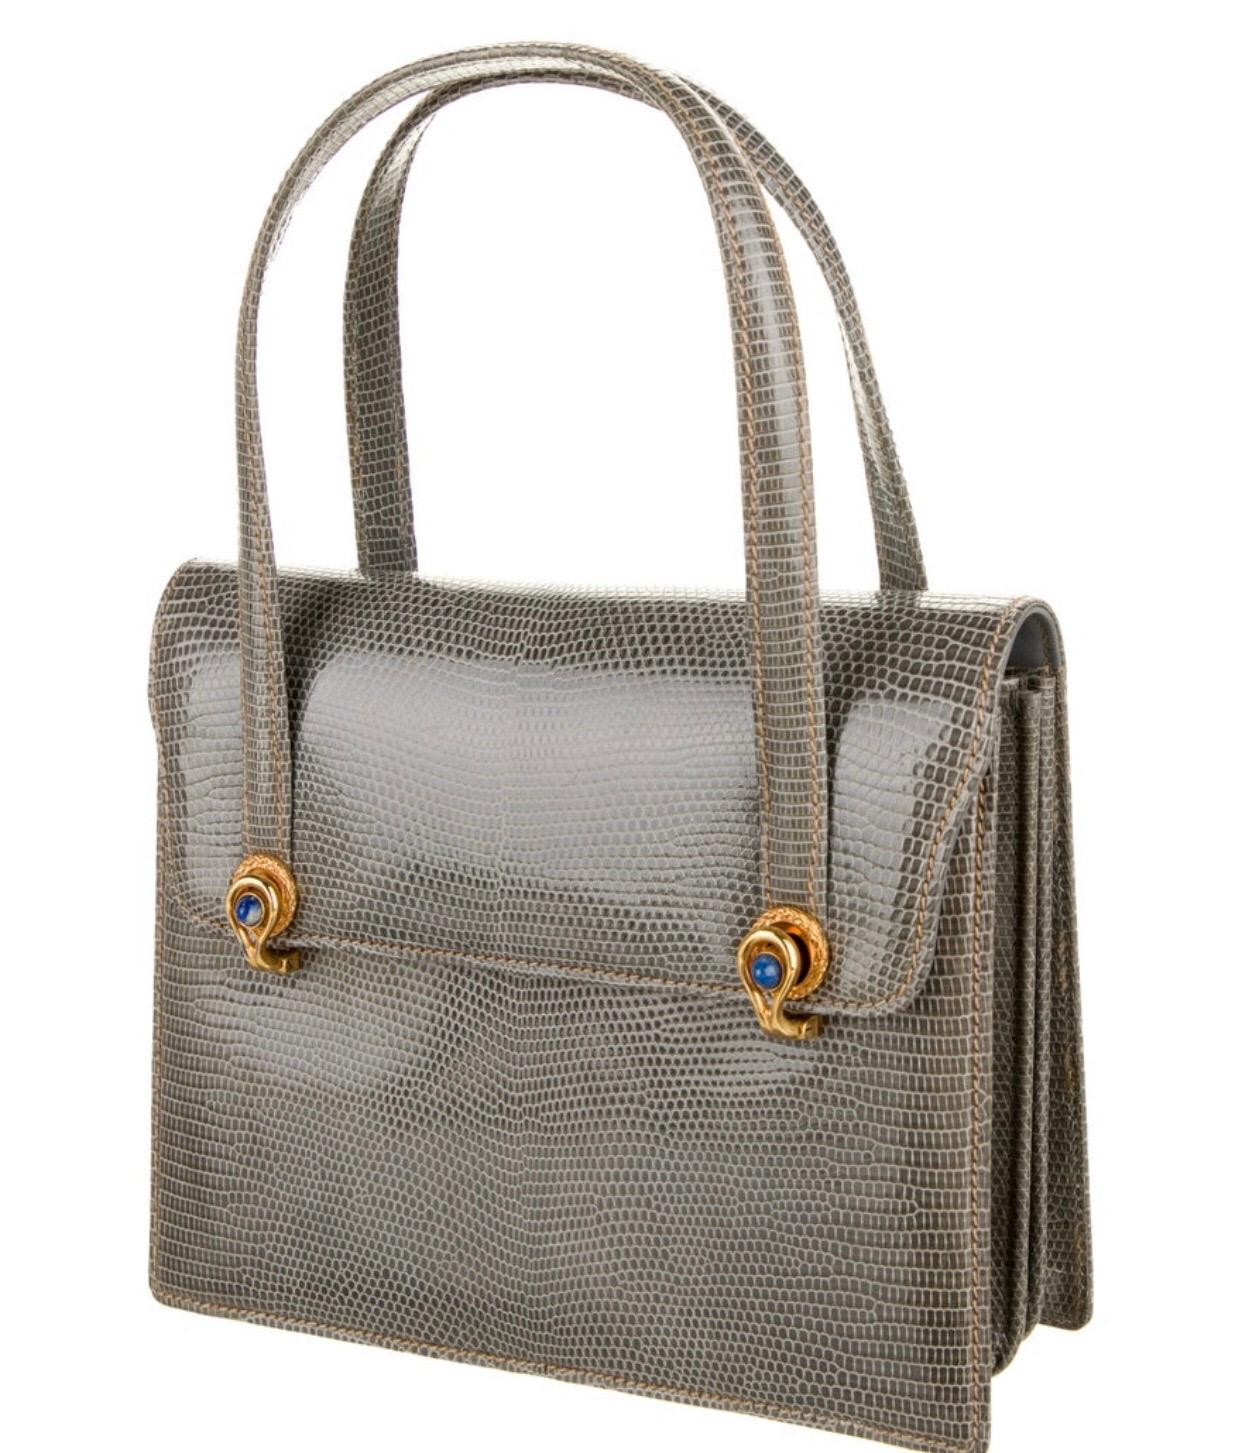 1960s GUCCI grey lizard handbag. Condition: excellent, looks unused. With original dust bag and box. Lapis stones on clasps. 
7